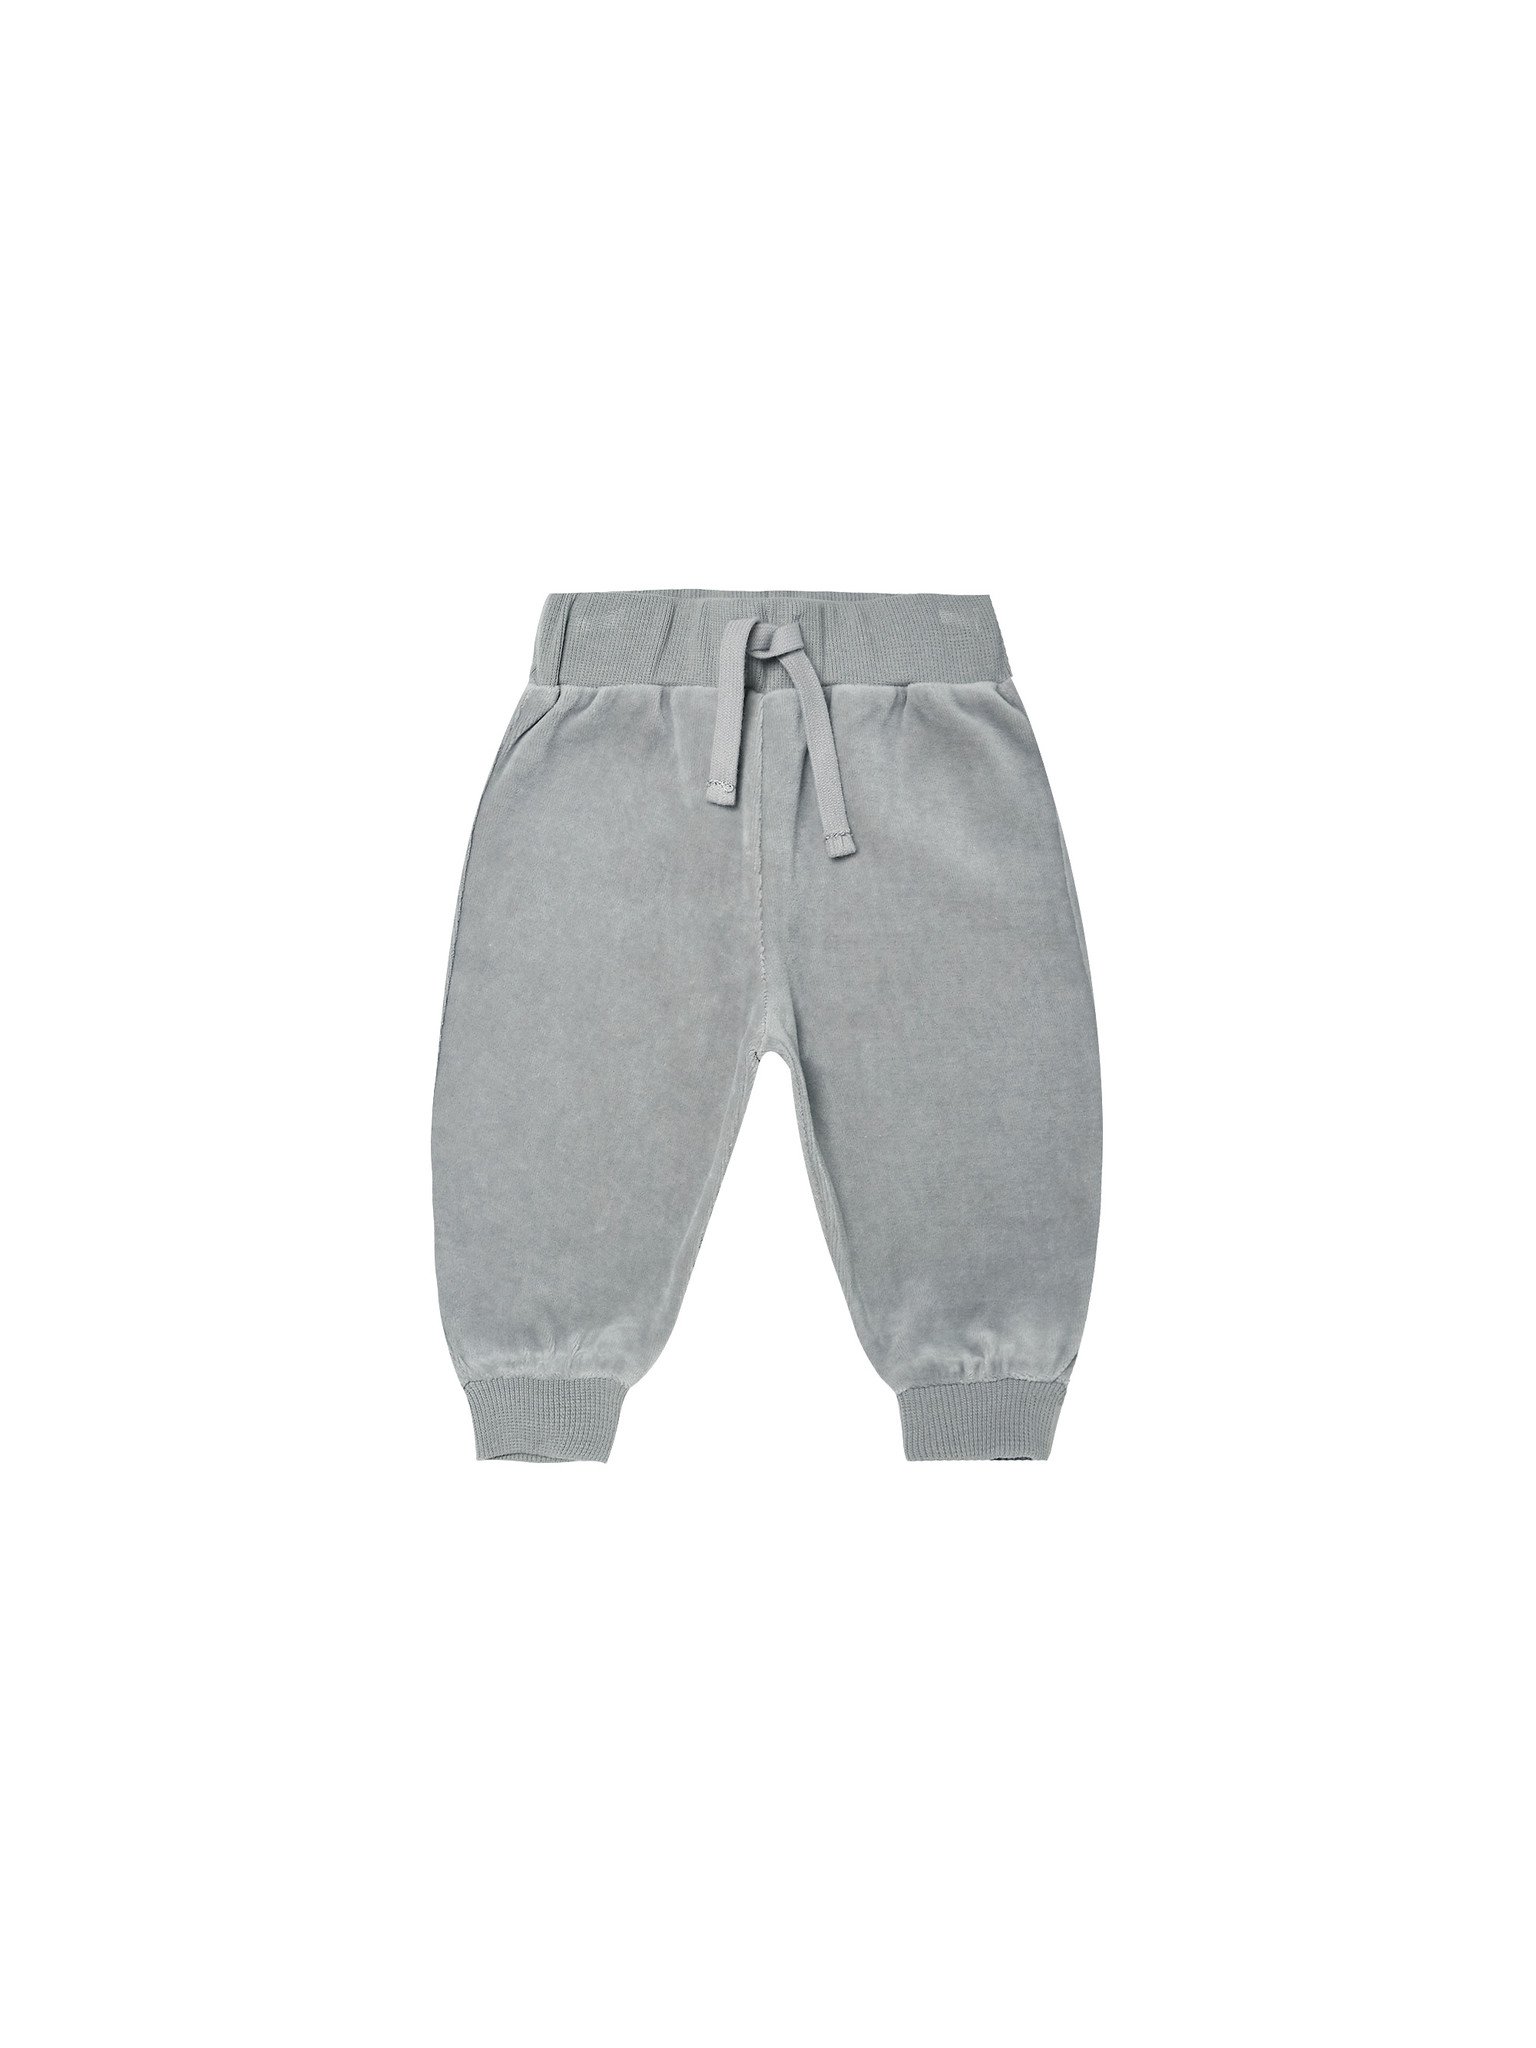 Quincy Mae Quincy Mae Relaxed Velour Sweatpant